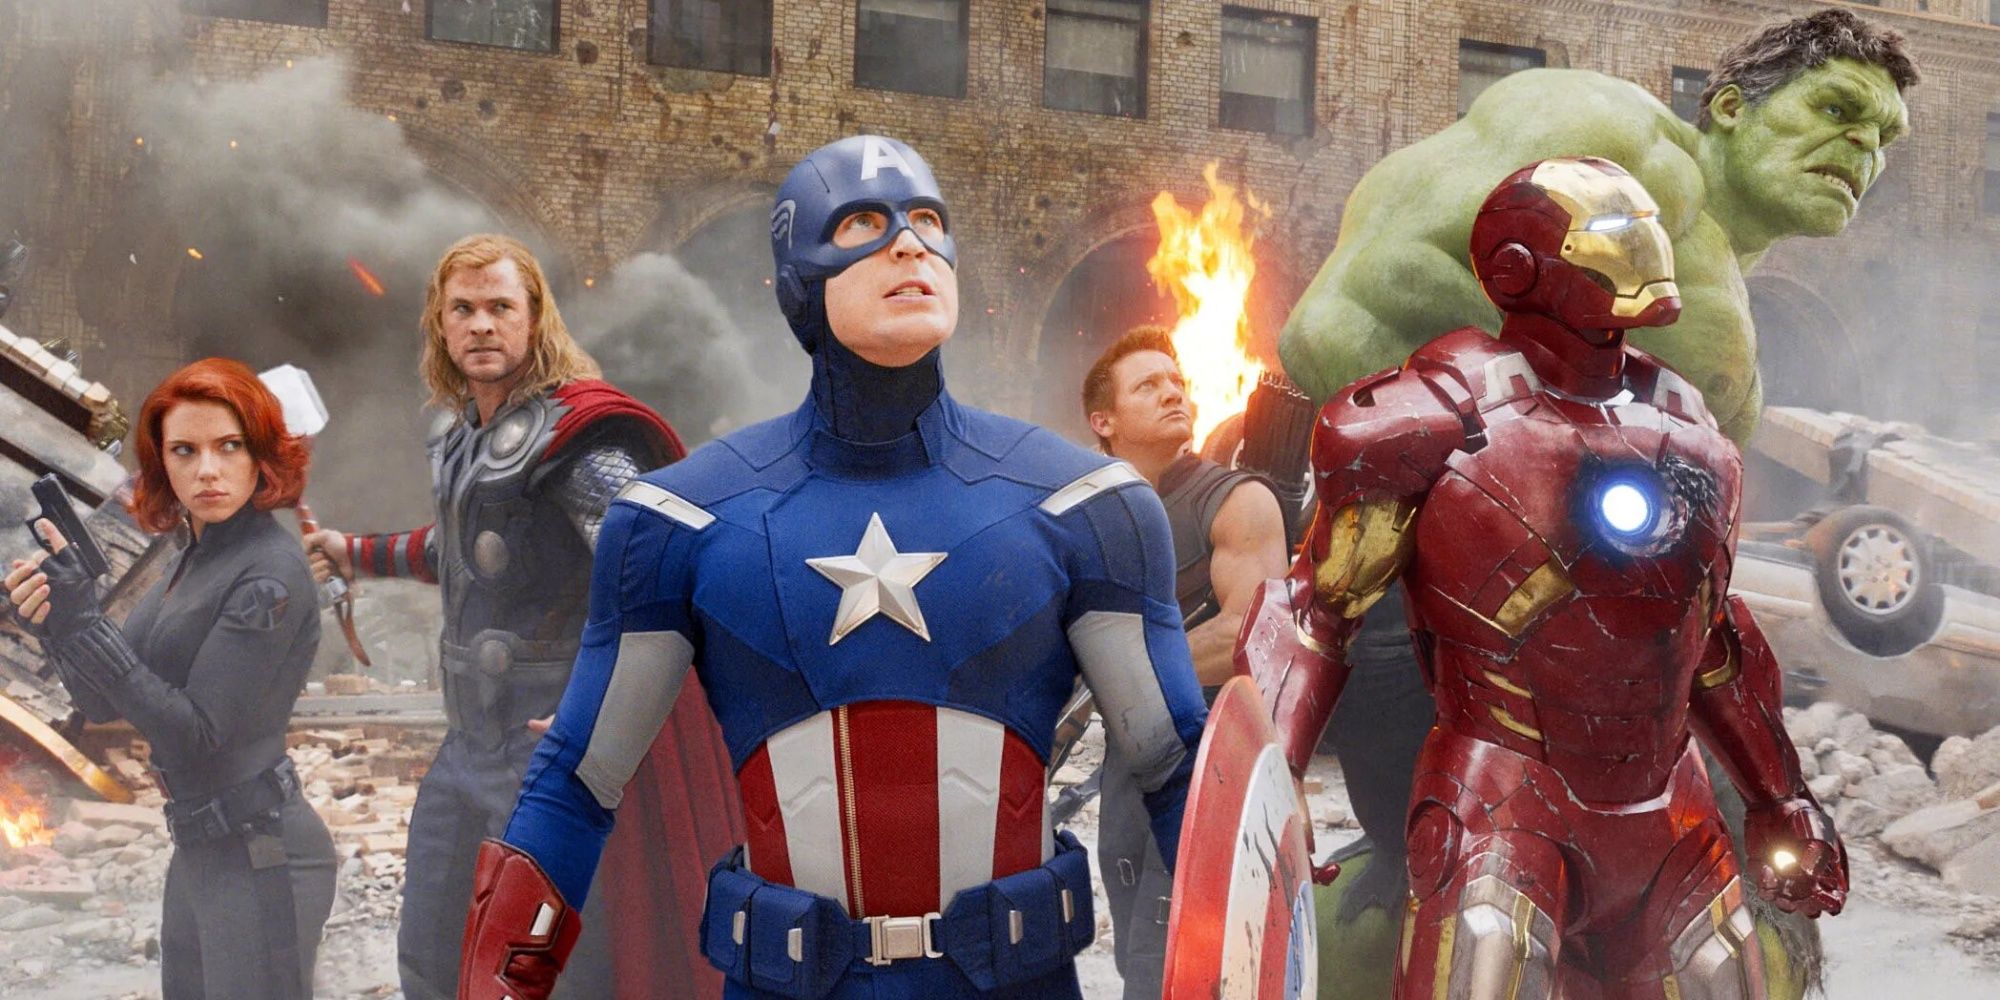 All the Avengers assemble in The Avengers (2012)